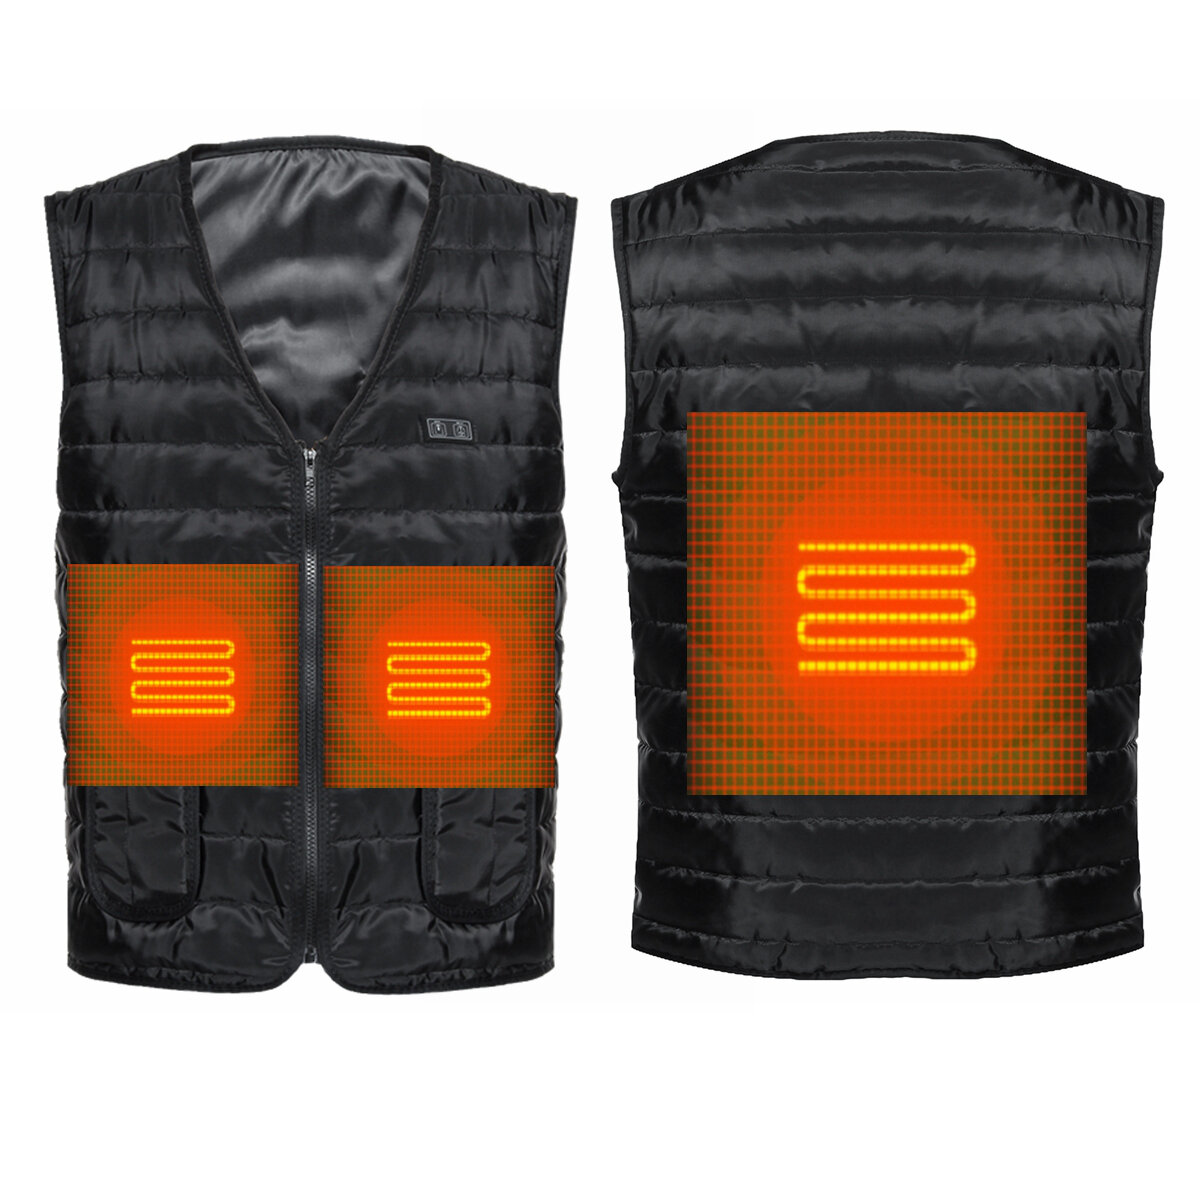 best price,dual,cotton,heated,electric,3,gear,usb,vest,coupon,price,discount